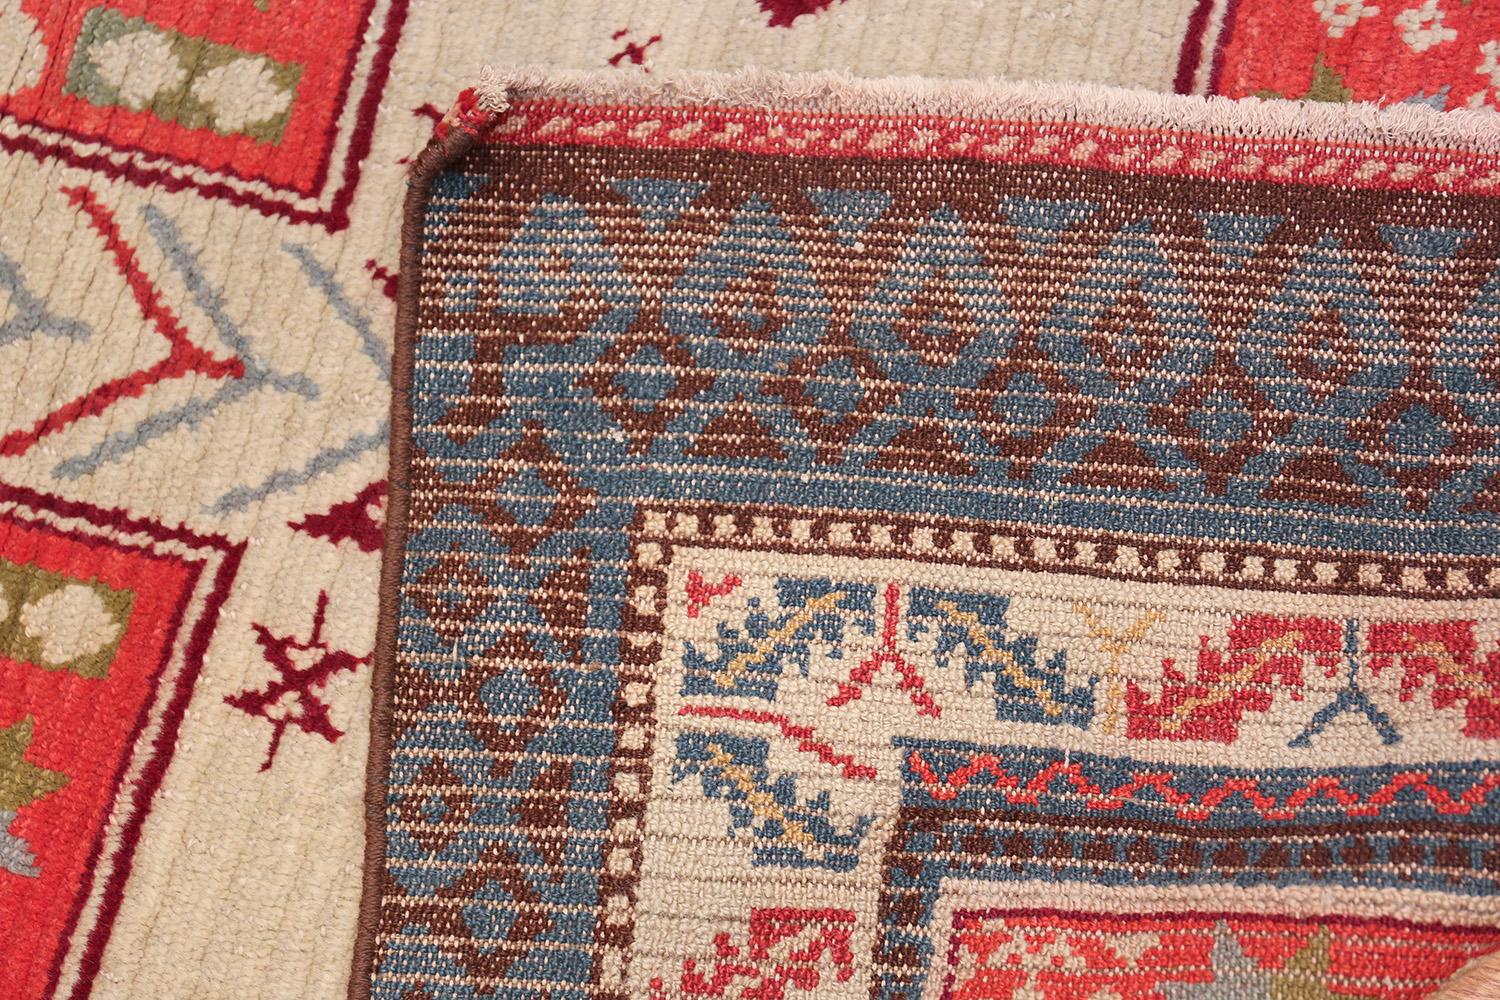 20th Century Small Size Antique Spanish Rug. Size: 3 ft x 5 ft 10 in (0.91 m x 1.78 m)